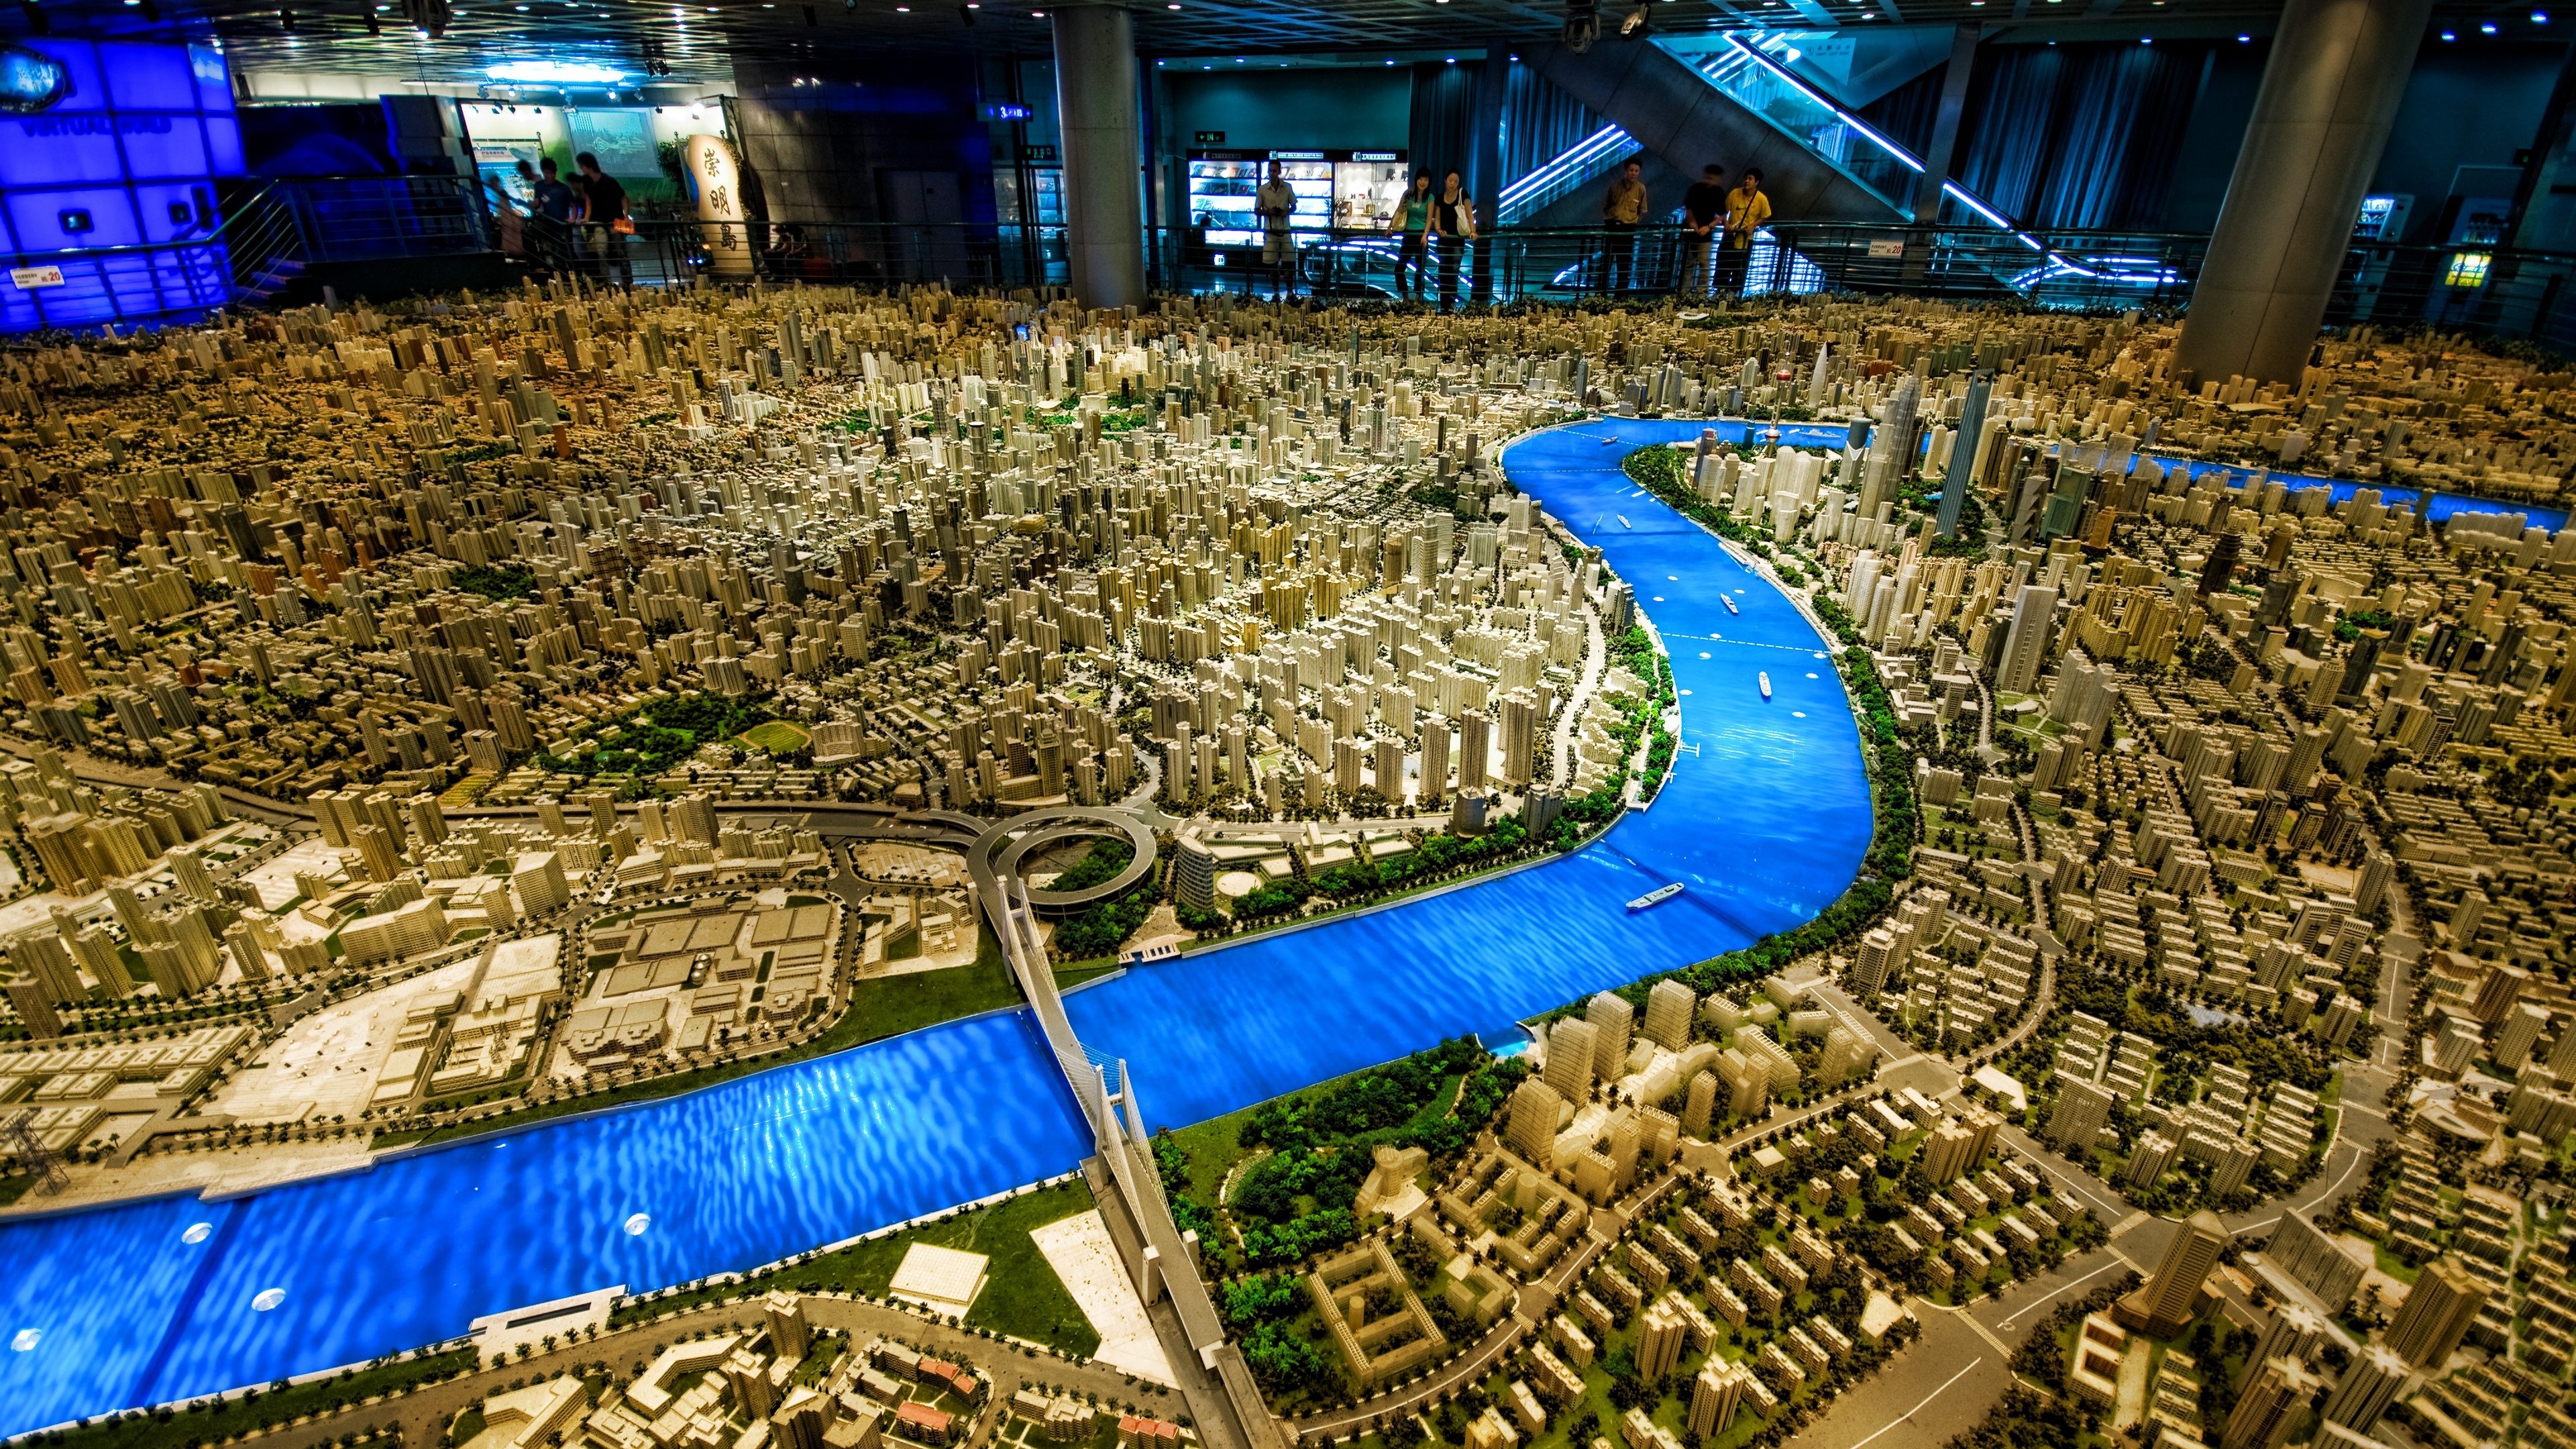 General 3840x2160 China photography Trey Ratcliff Shanghai cityscape city Architecture models people exhibition